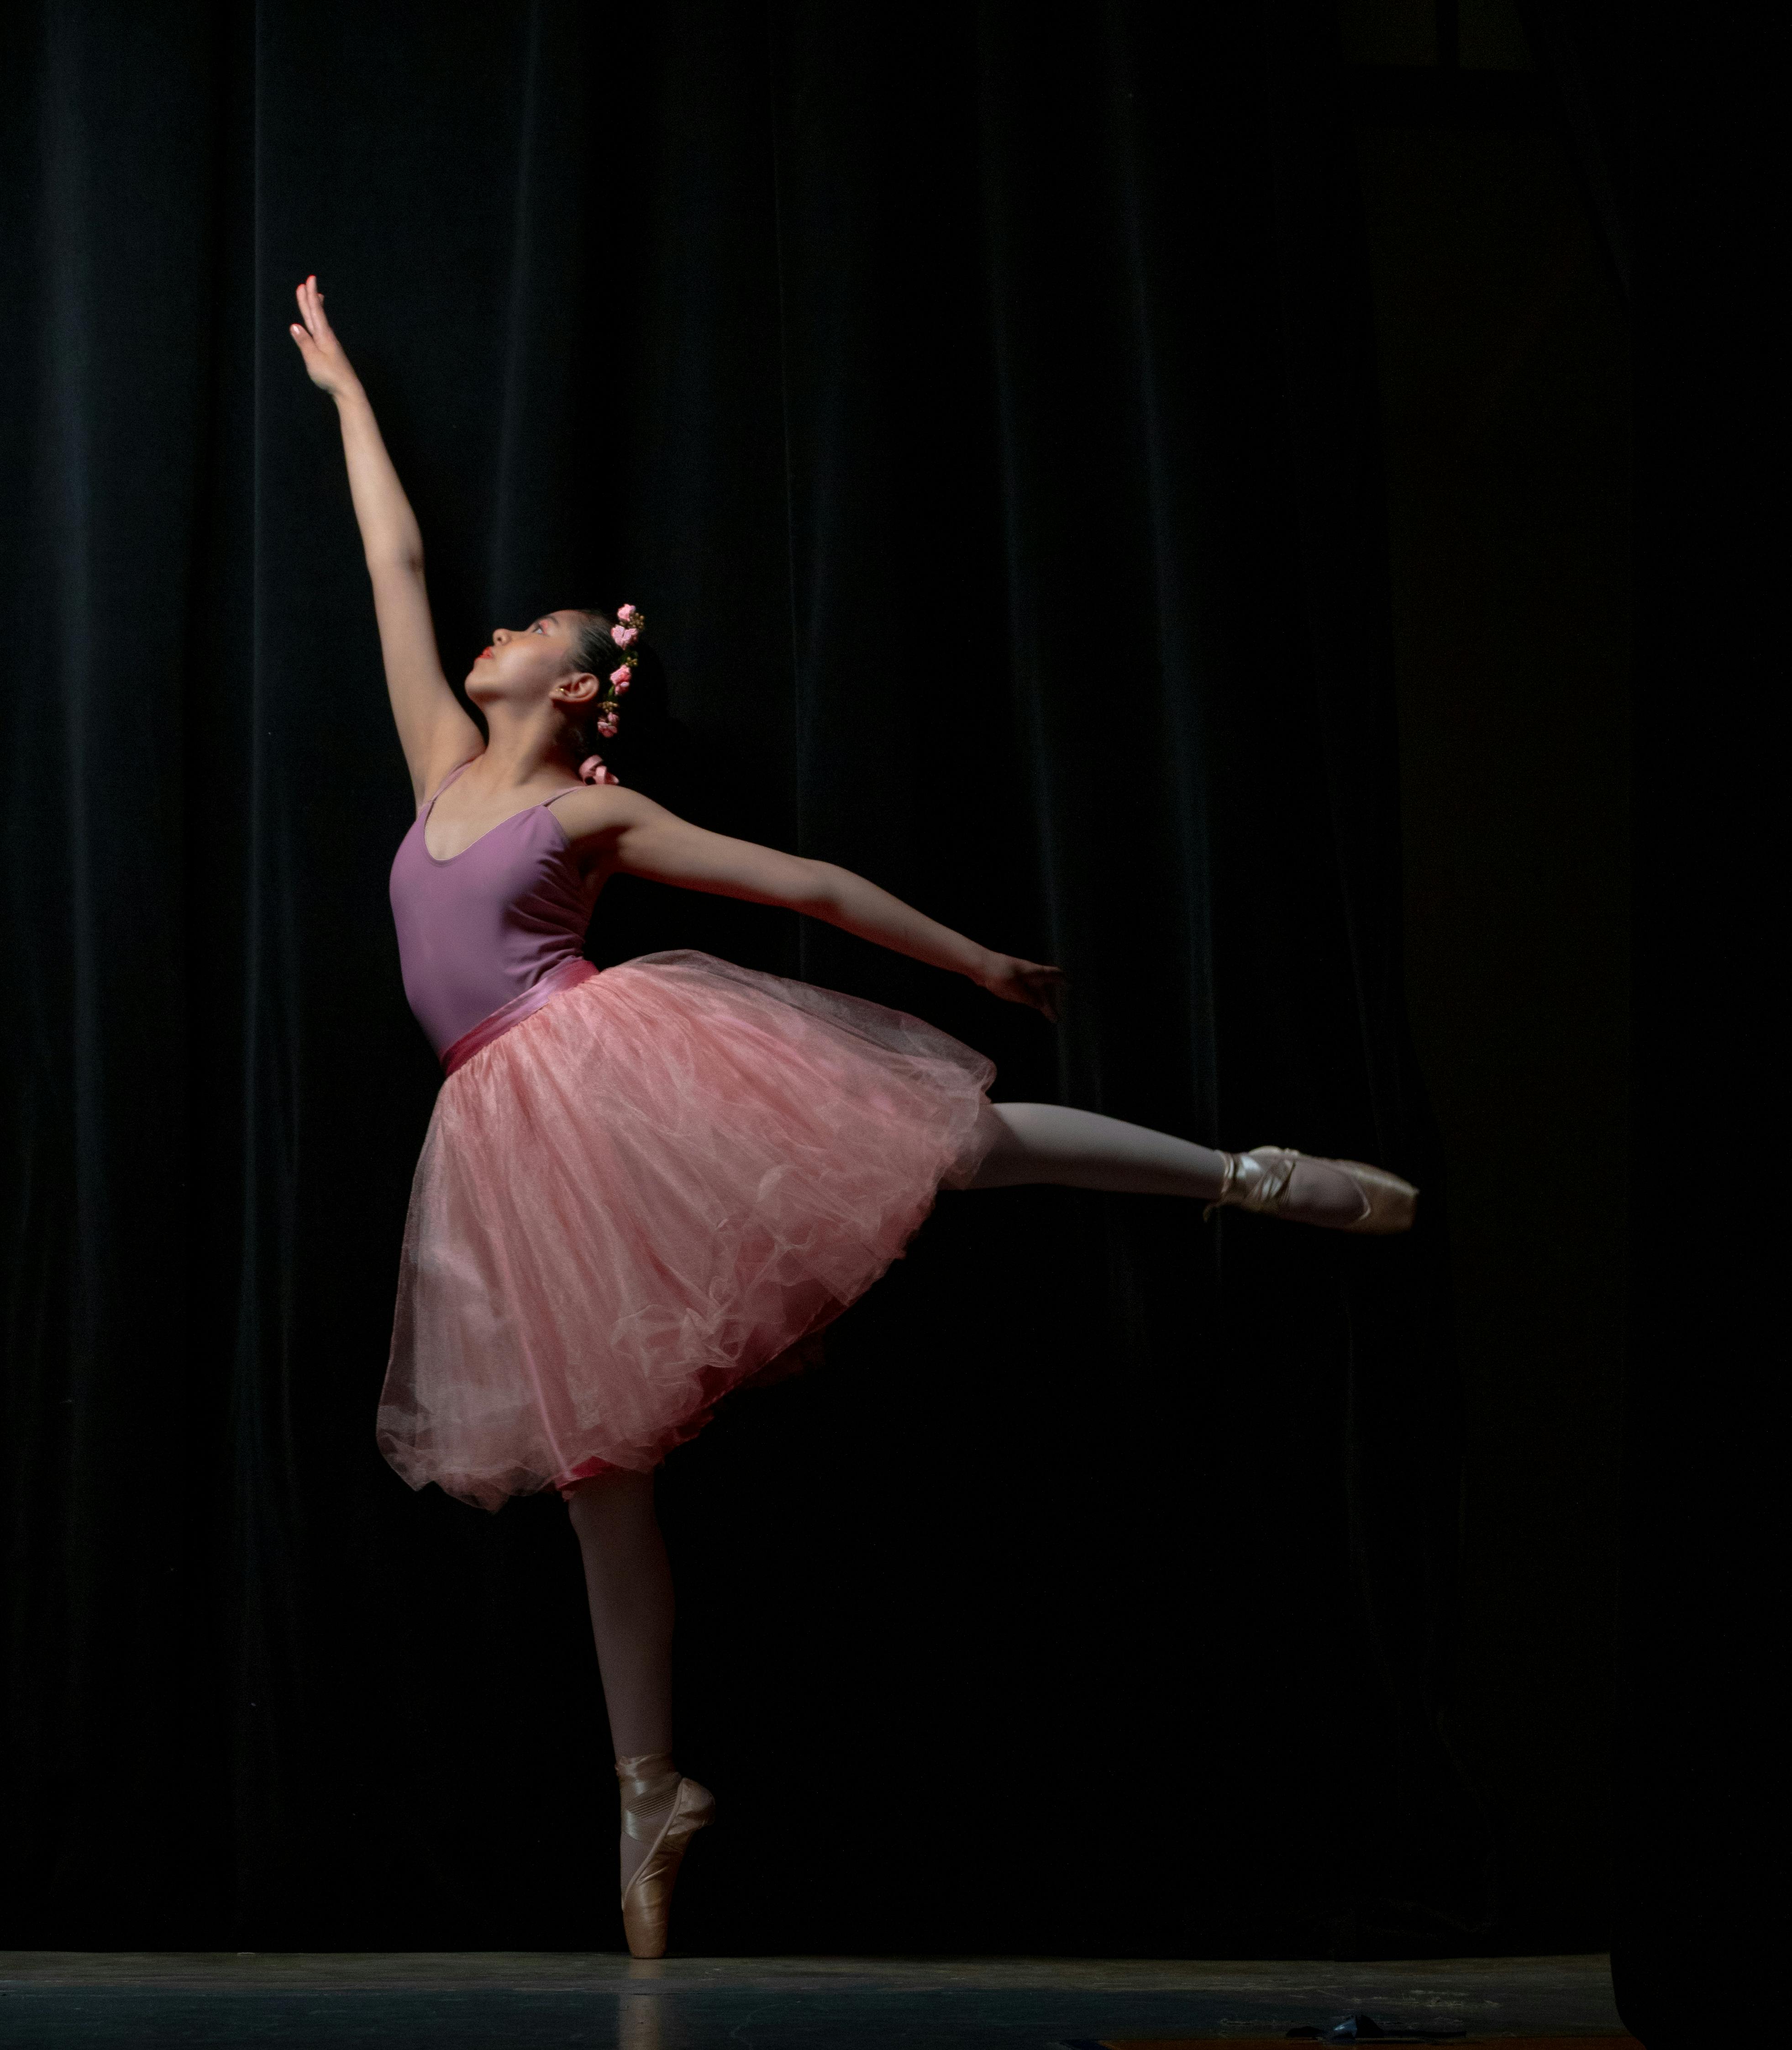 classical ballet dancer dancing on the stage